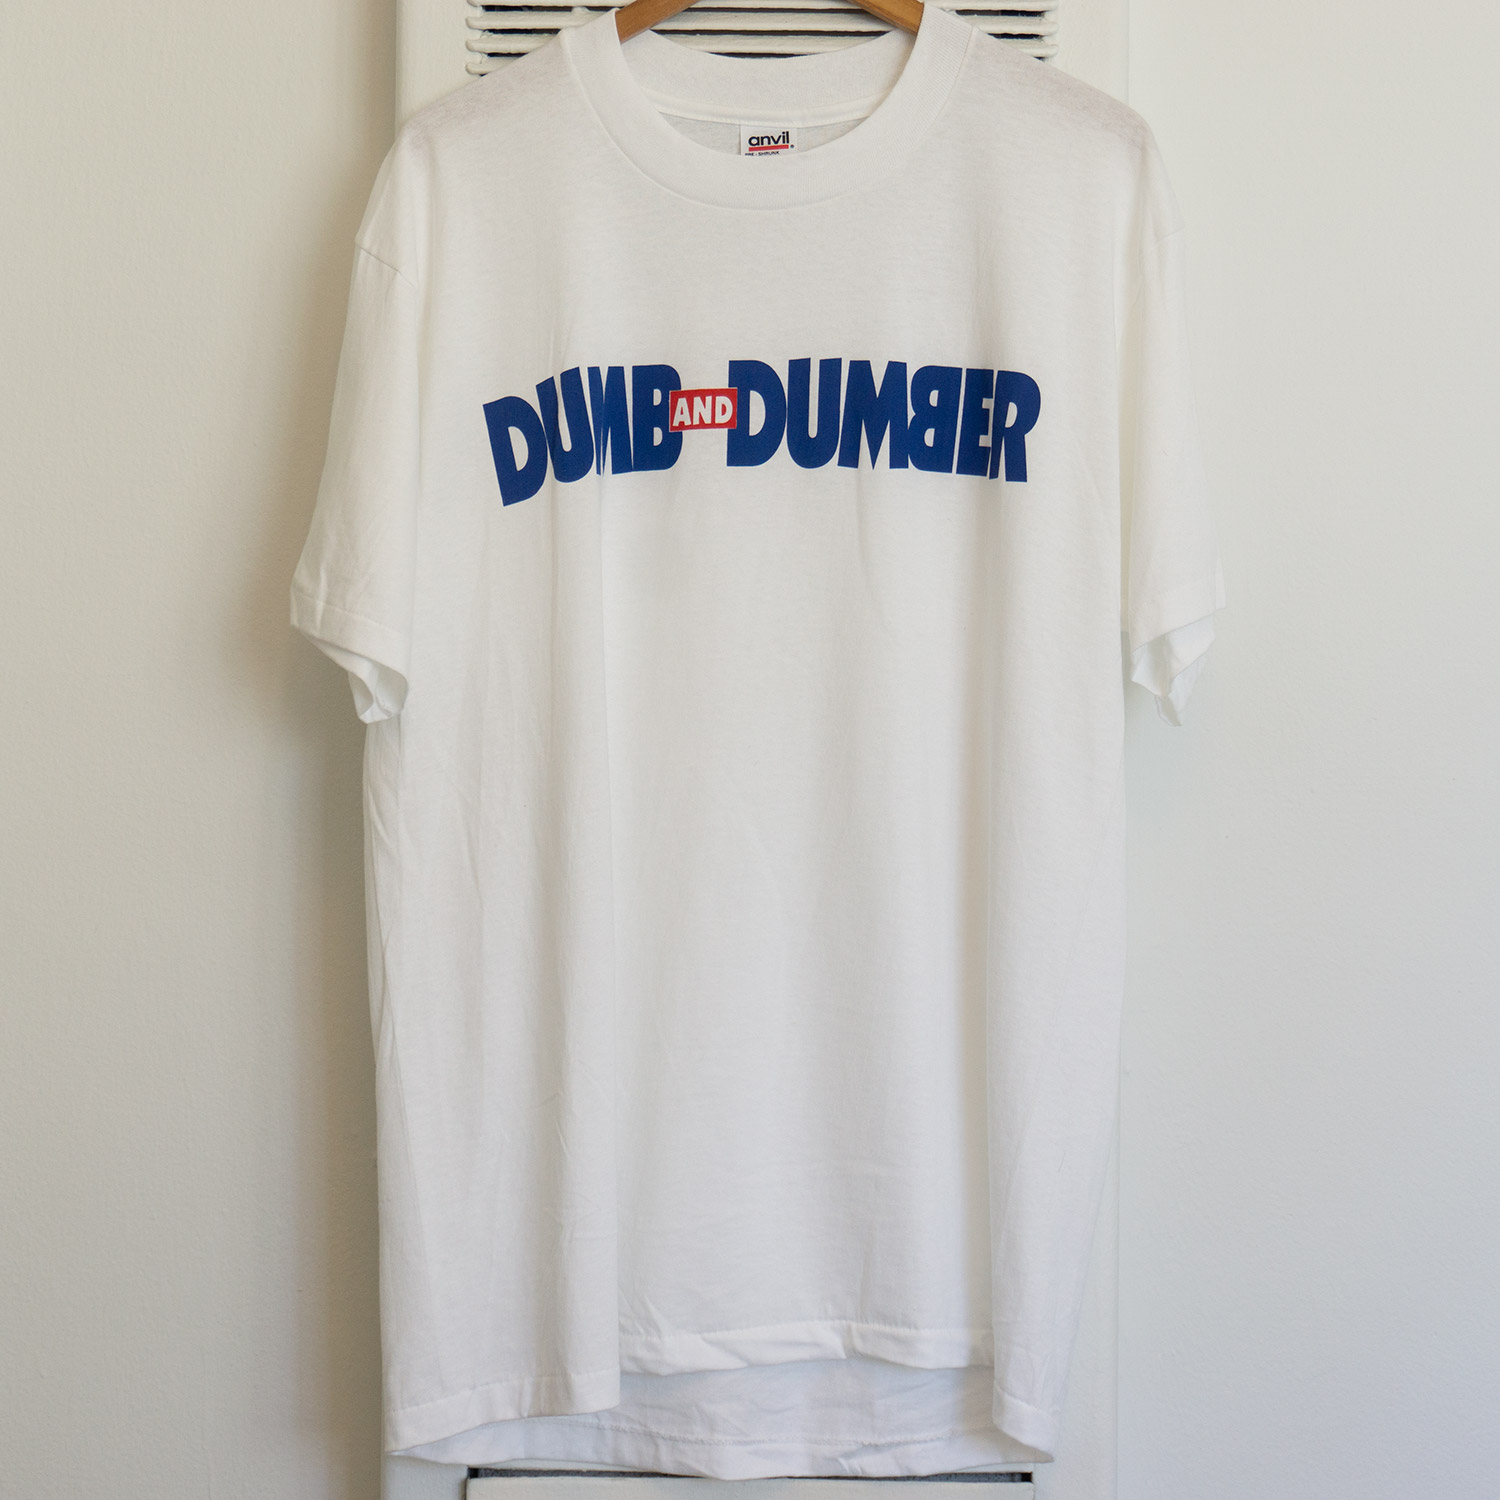 Vintage Dumb and Dumber Movie T-shirt, Front